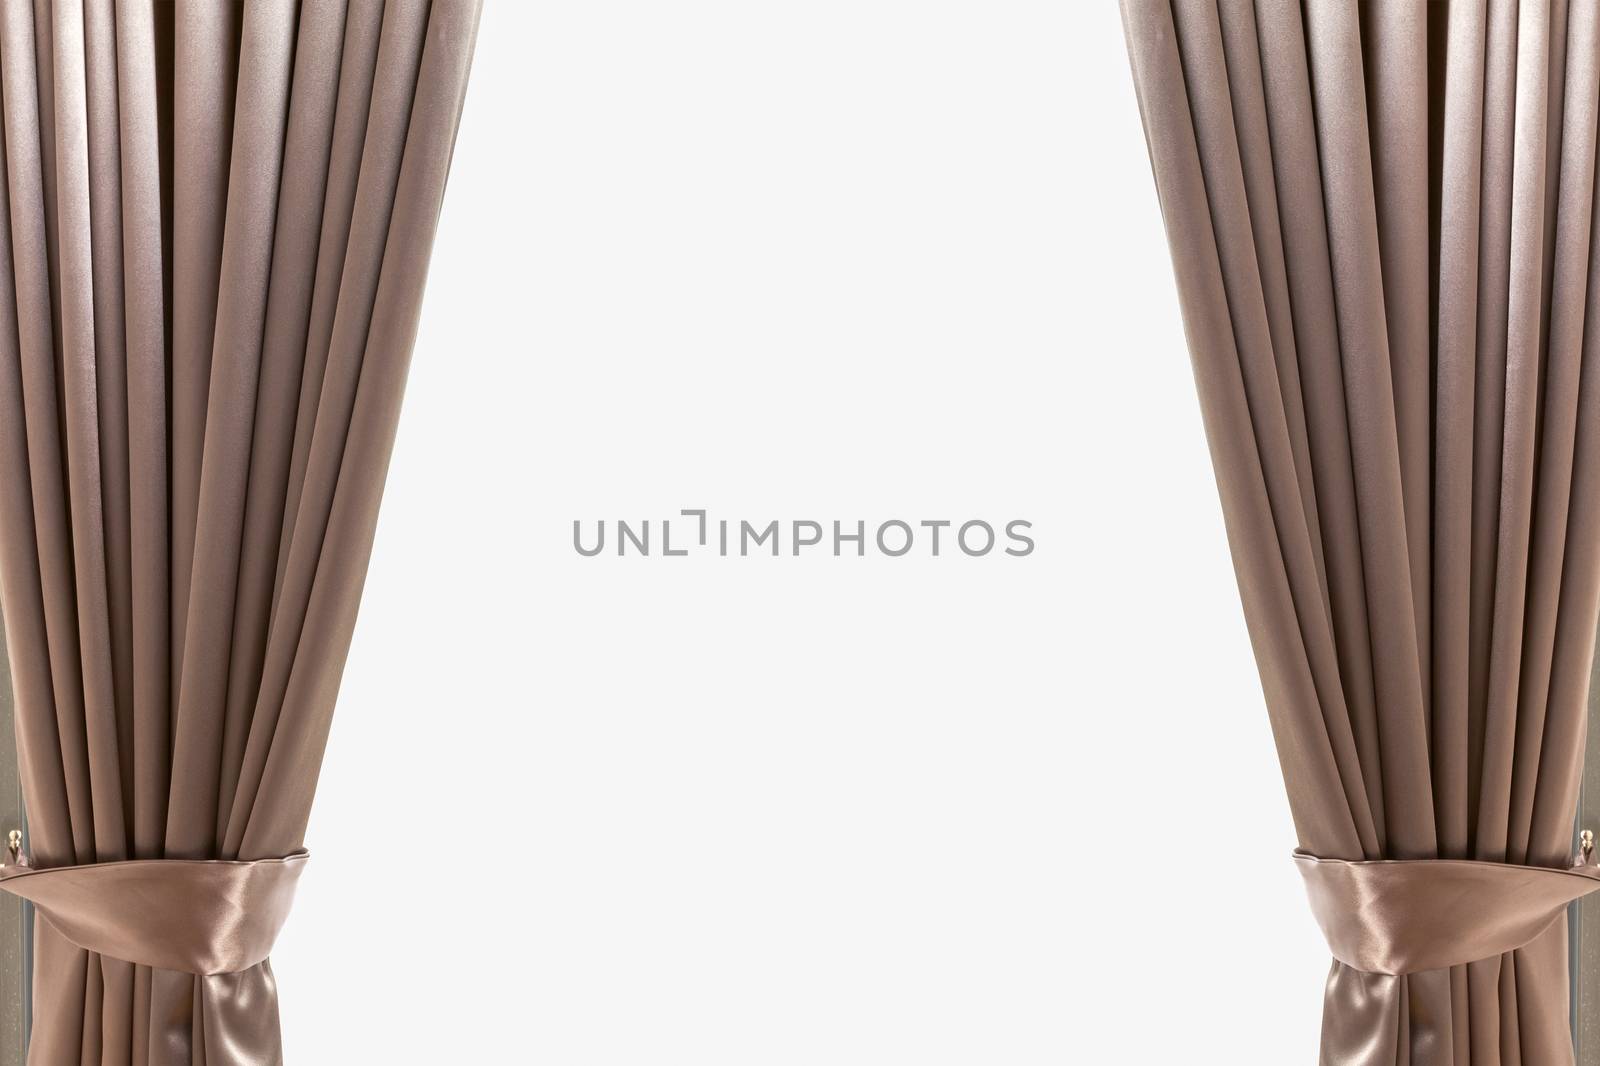 Luxury brown leather curtain background